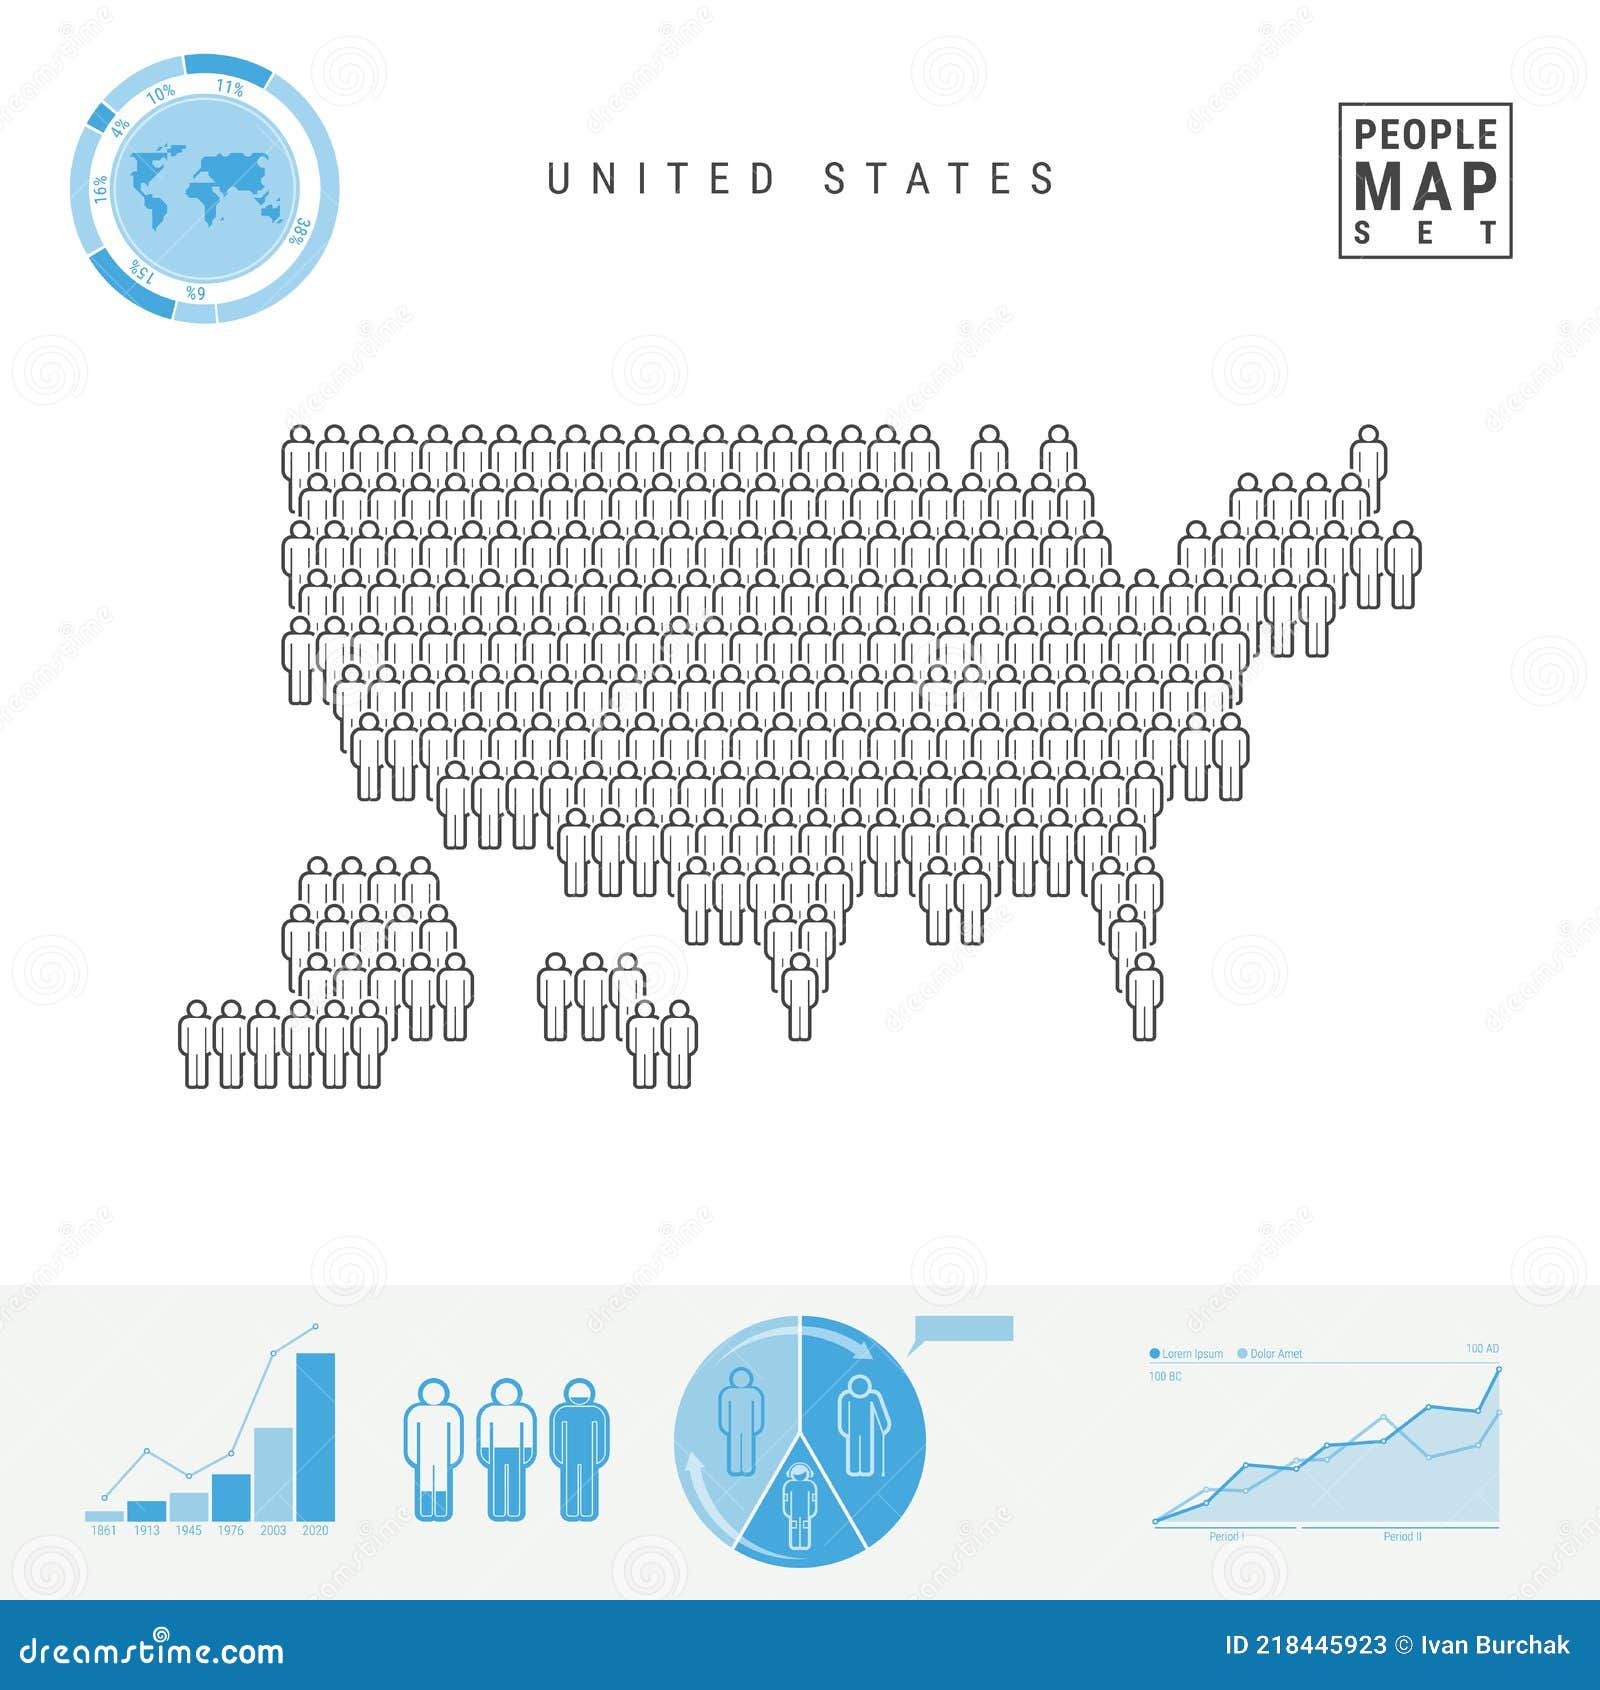 united states people icon map. stylized  silhouette of usa. population growth and aging infographic s